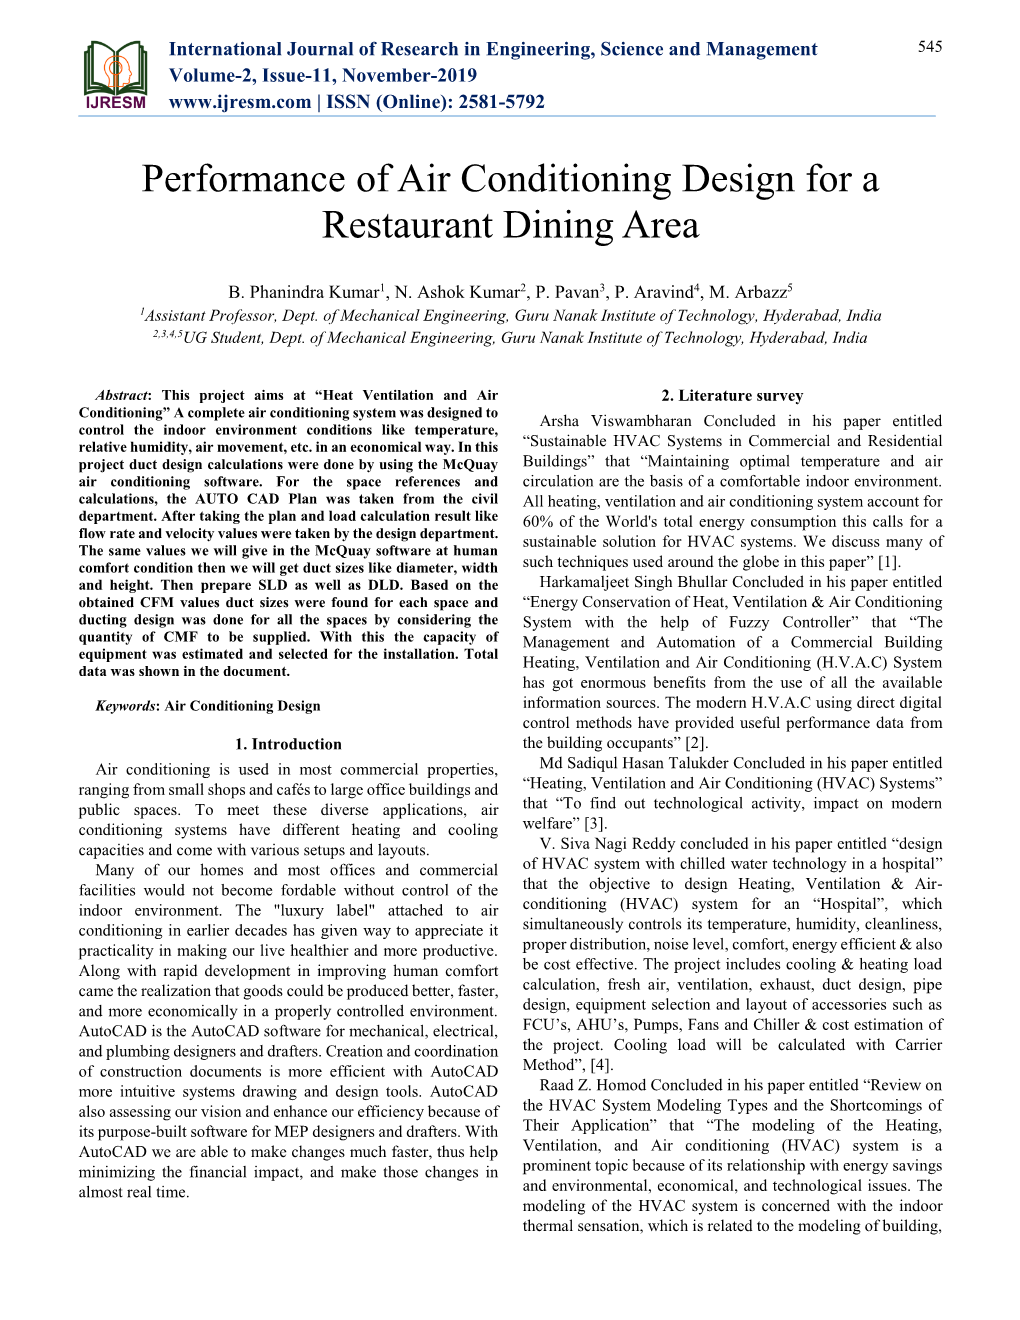 Performance of Air Conditioning Design for a Restaurant Dining Area